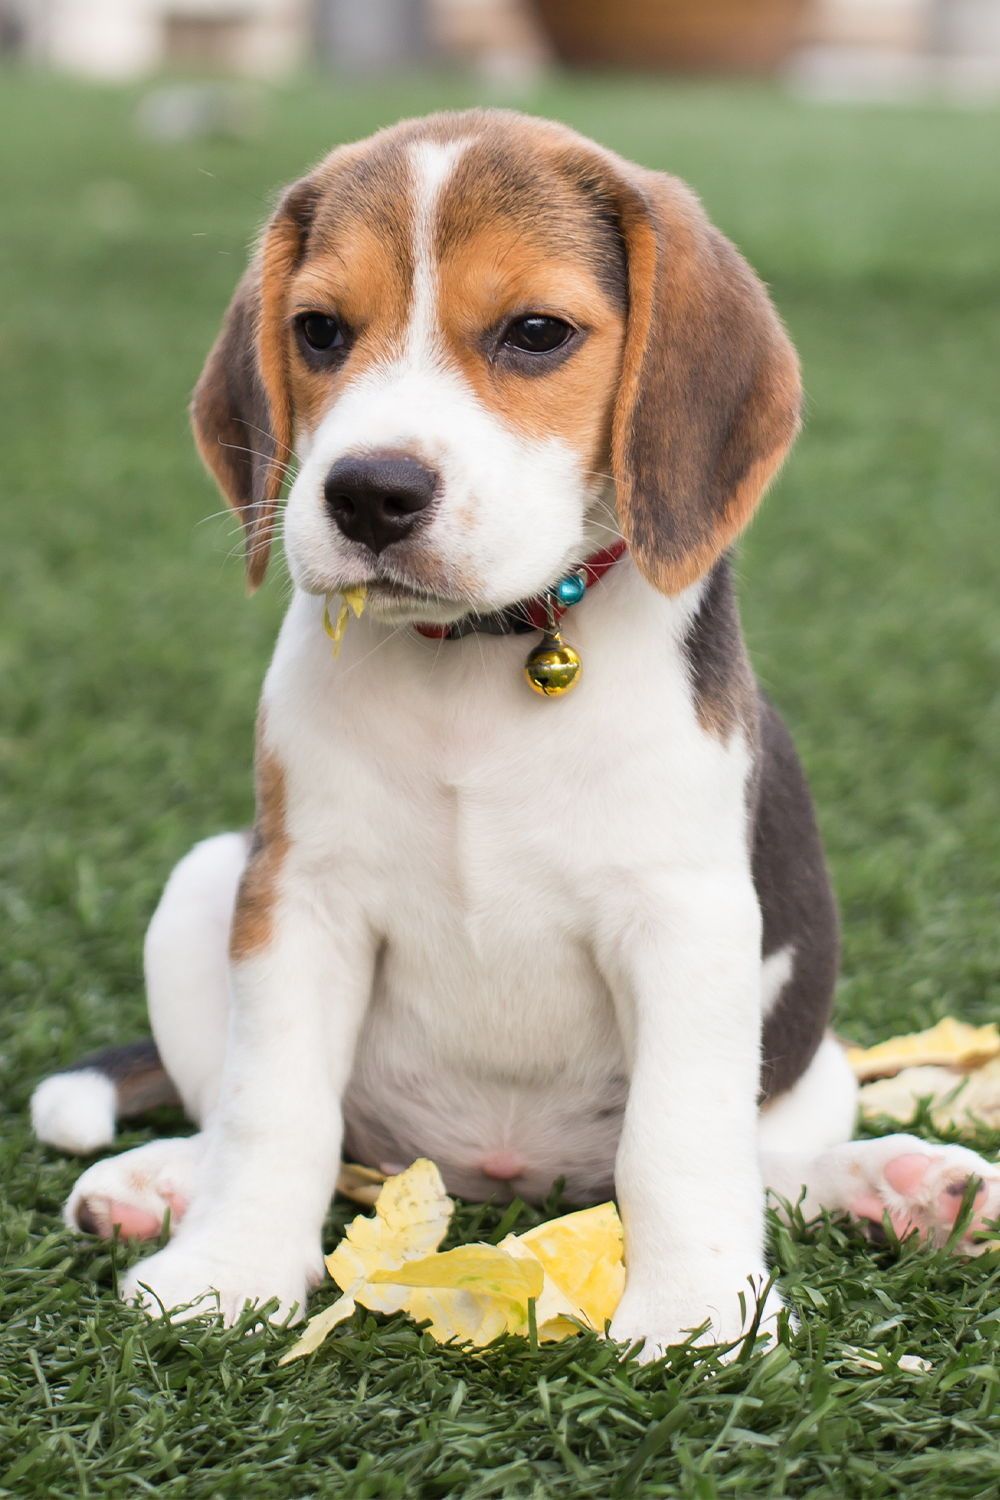 How to Care for Beagle